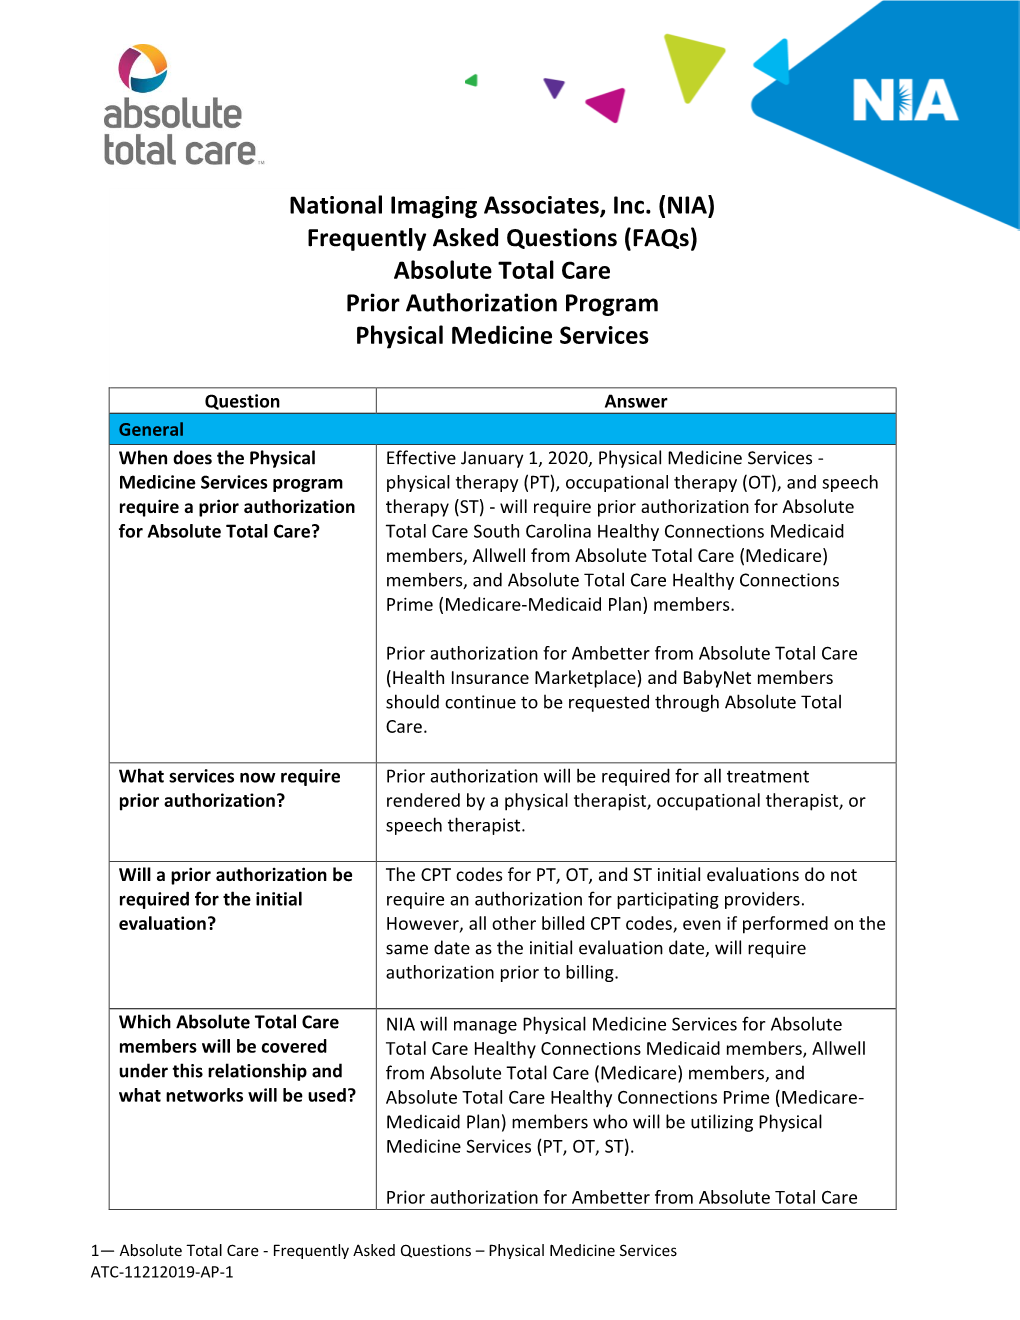 (NIA) Frequently Asked Questions (Faqs) Absolute Total Care Prior Authorization Program Physical Medicine Services